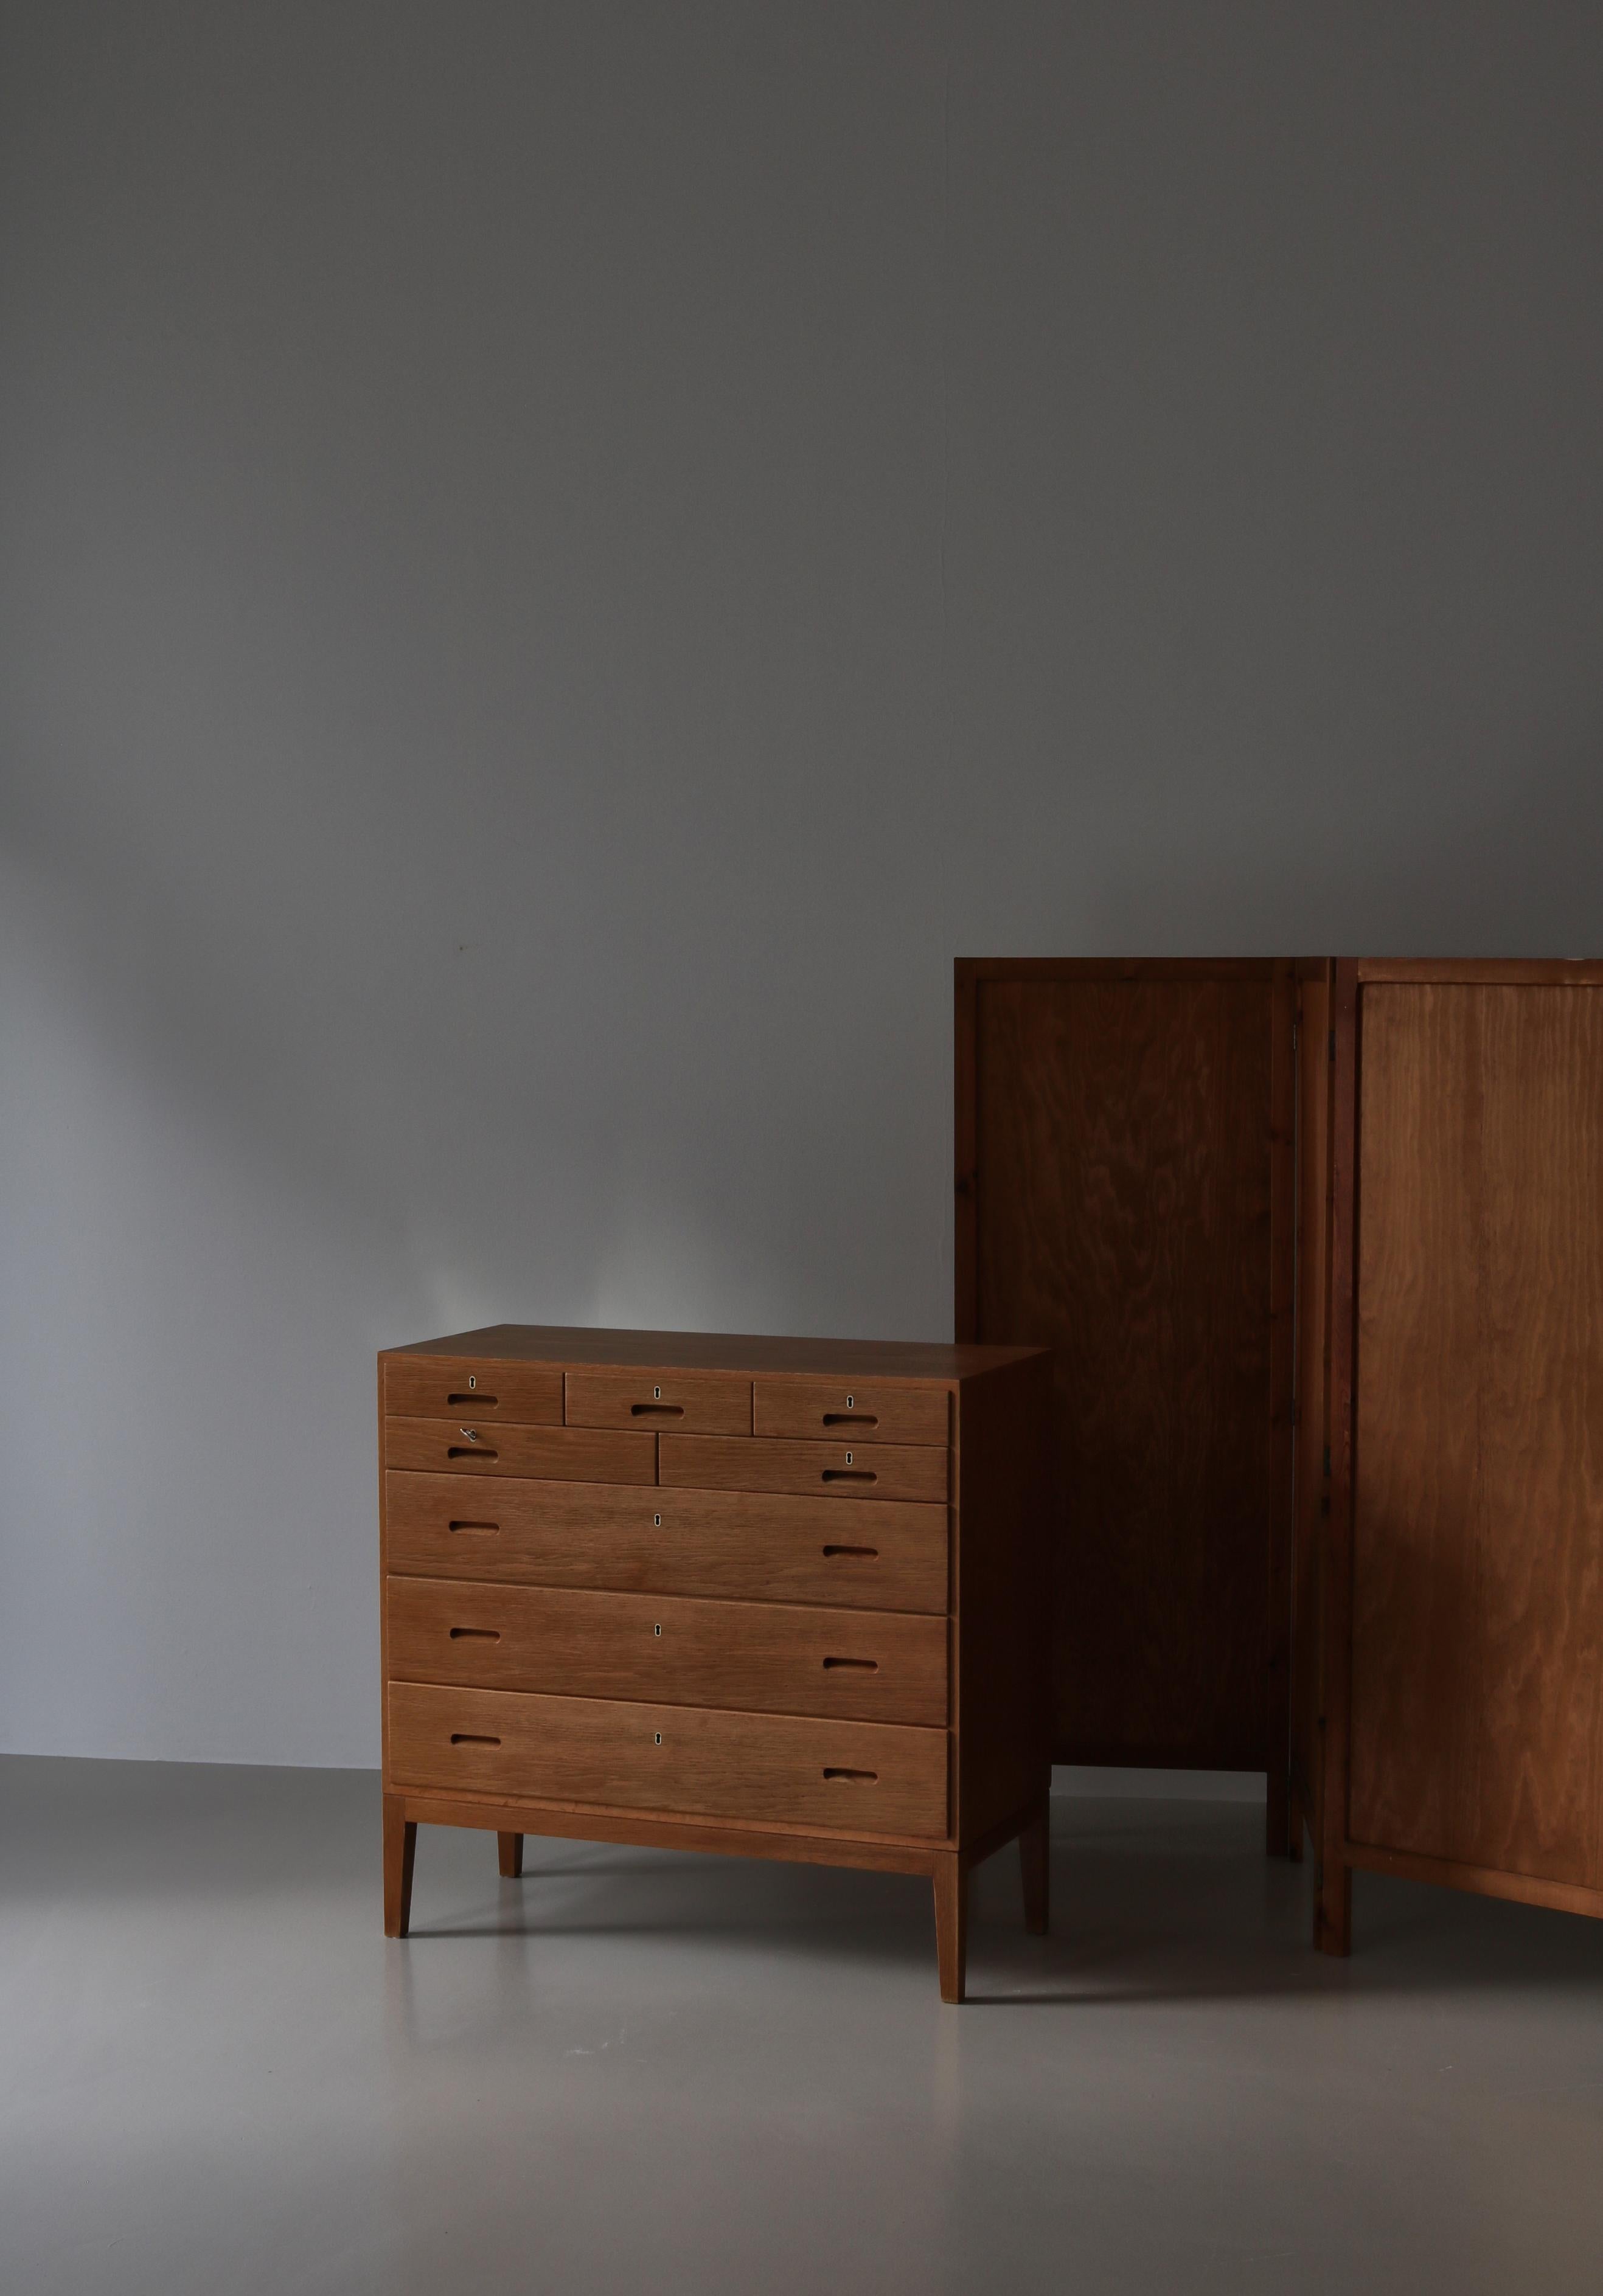 Danish Modern chest of drawers made in the 1960s at cabinetmaker P. Jeppesens and designed by Kaj Winding. Rare oak edition with 8 drawers. Elegant and simple design with beautiful details such as the carved drawer handles. Original key included.